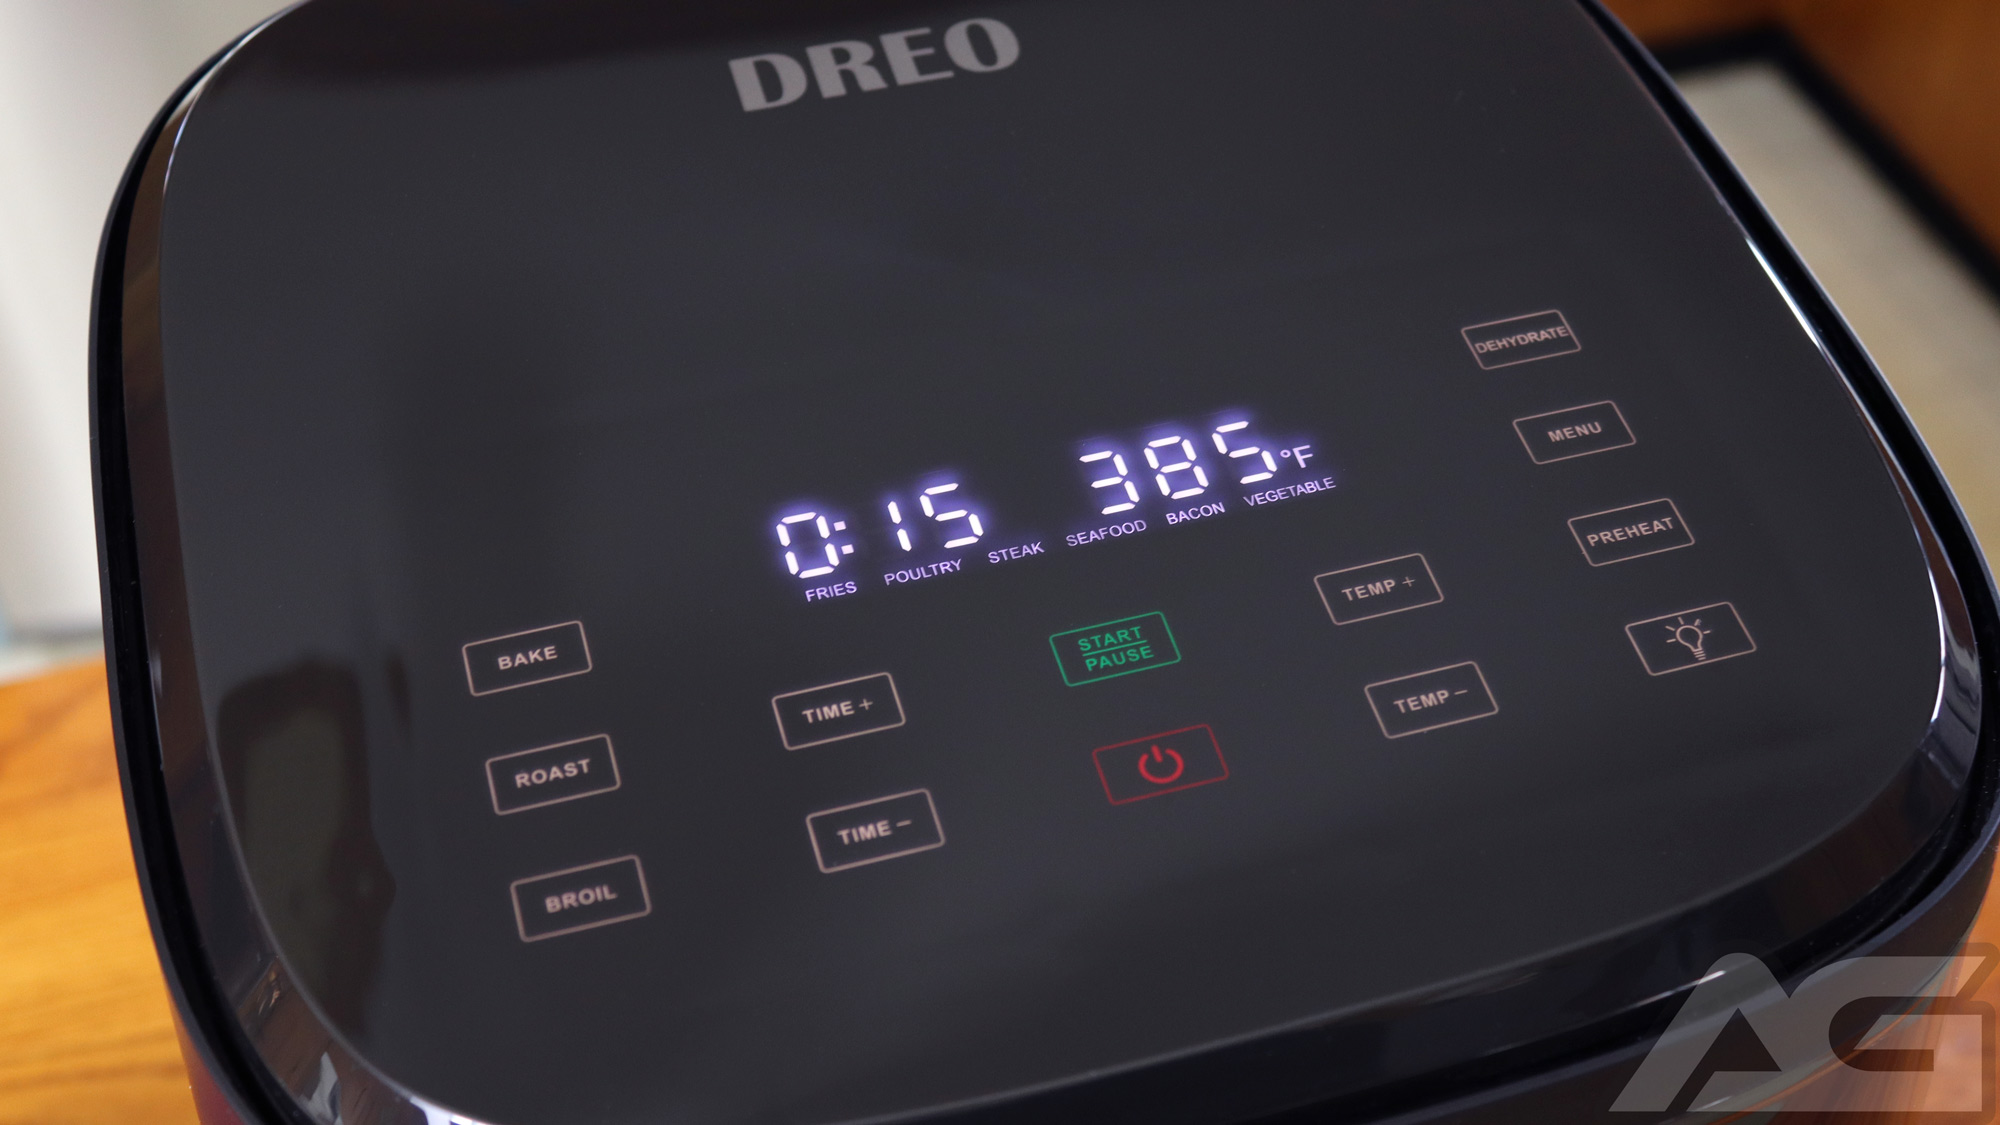 New Dreo Air Fryer Pro Max Review: Is This the Ultimate Kitchen